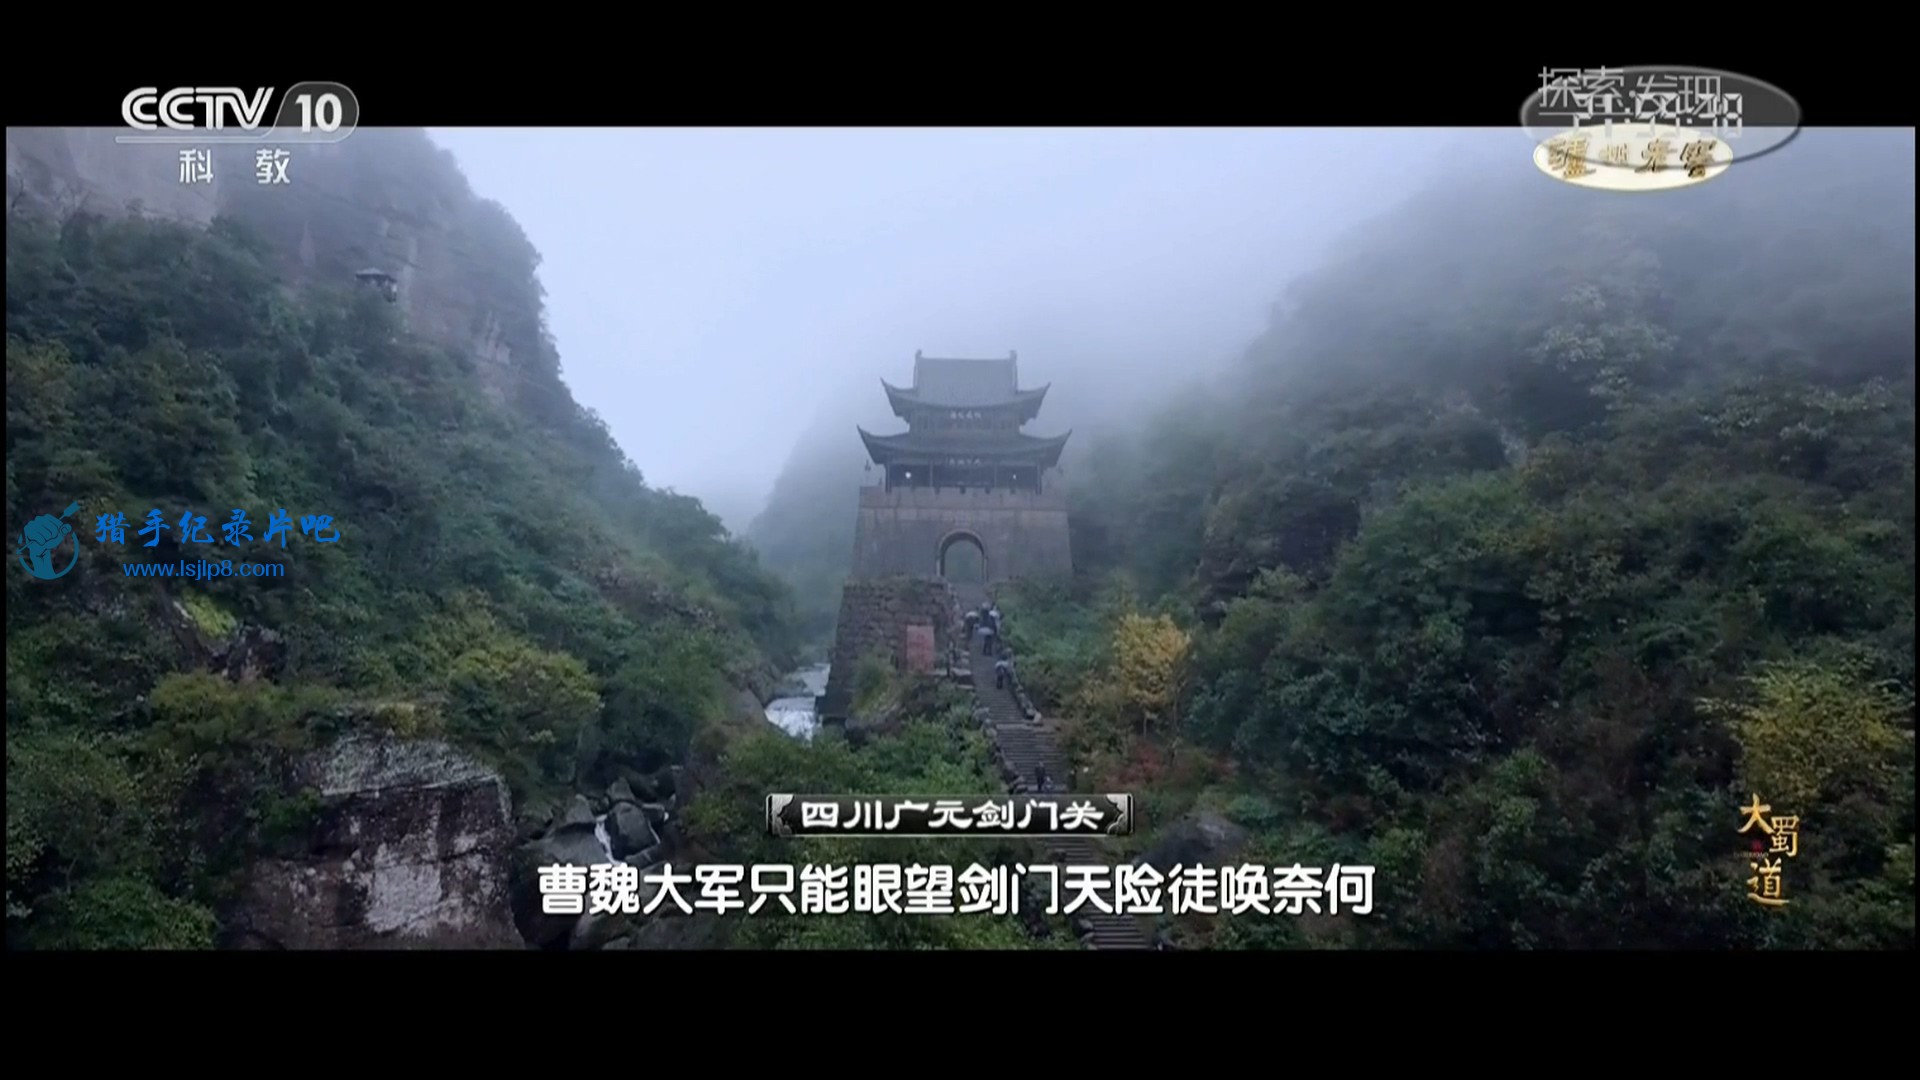 20180522_CCTV10_Discovery.2018-97_The.Ancient.Sichuan.Road.EP01-jlp.ts_20190913_.jpg